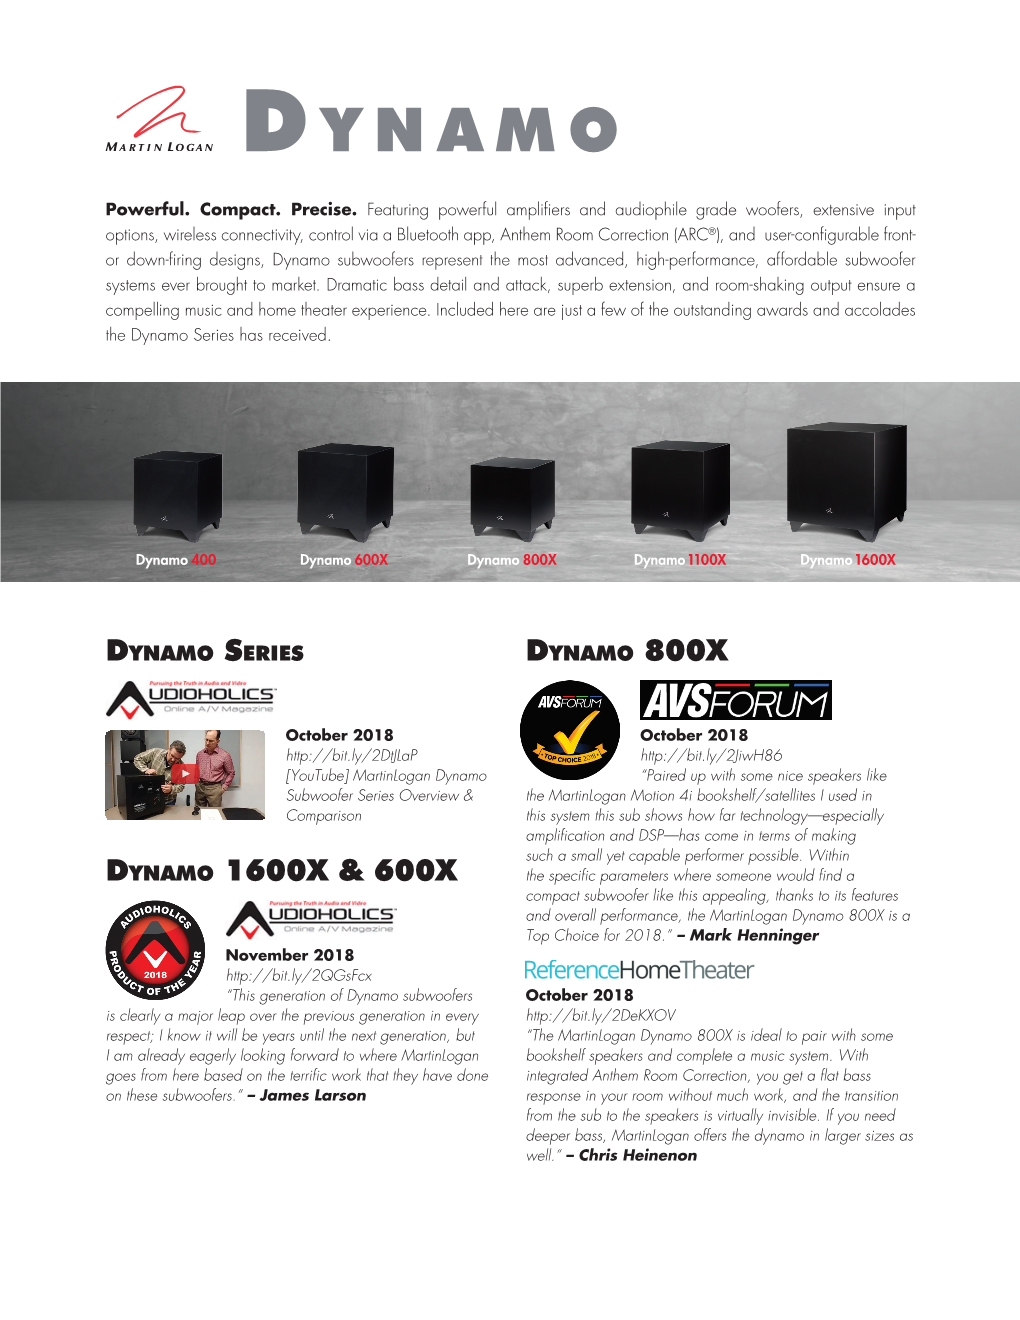 Dynamo Subwoofers Represent the Most Advanced, High-Performance, Affordable Subwoofer Systems Ever Brought to Market